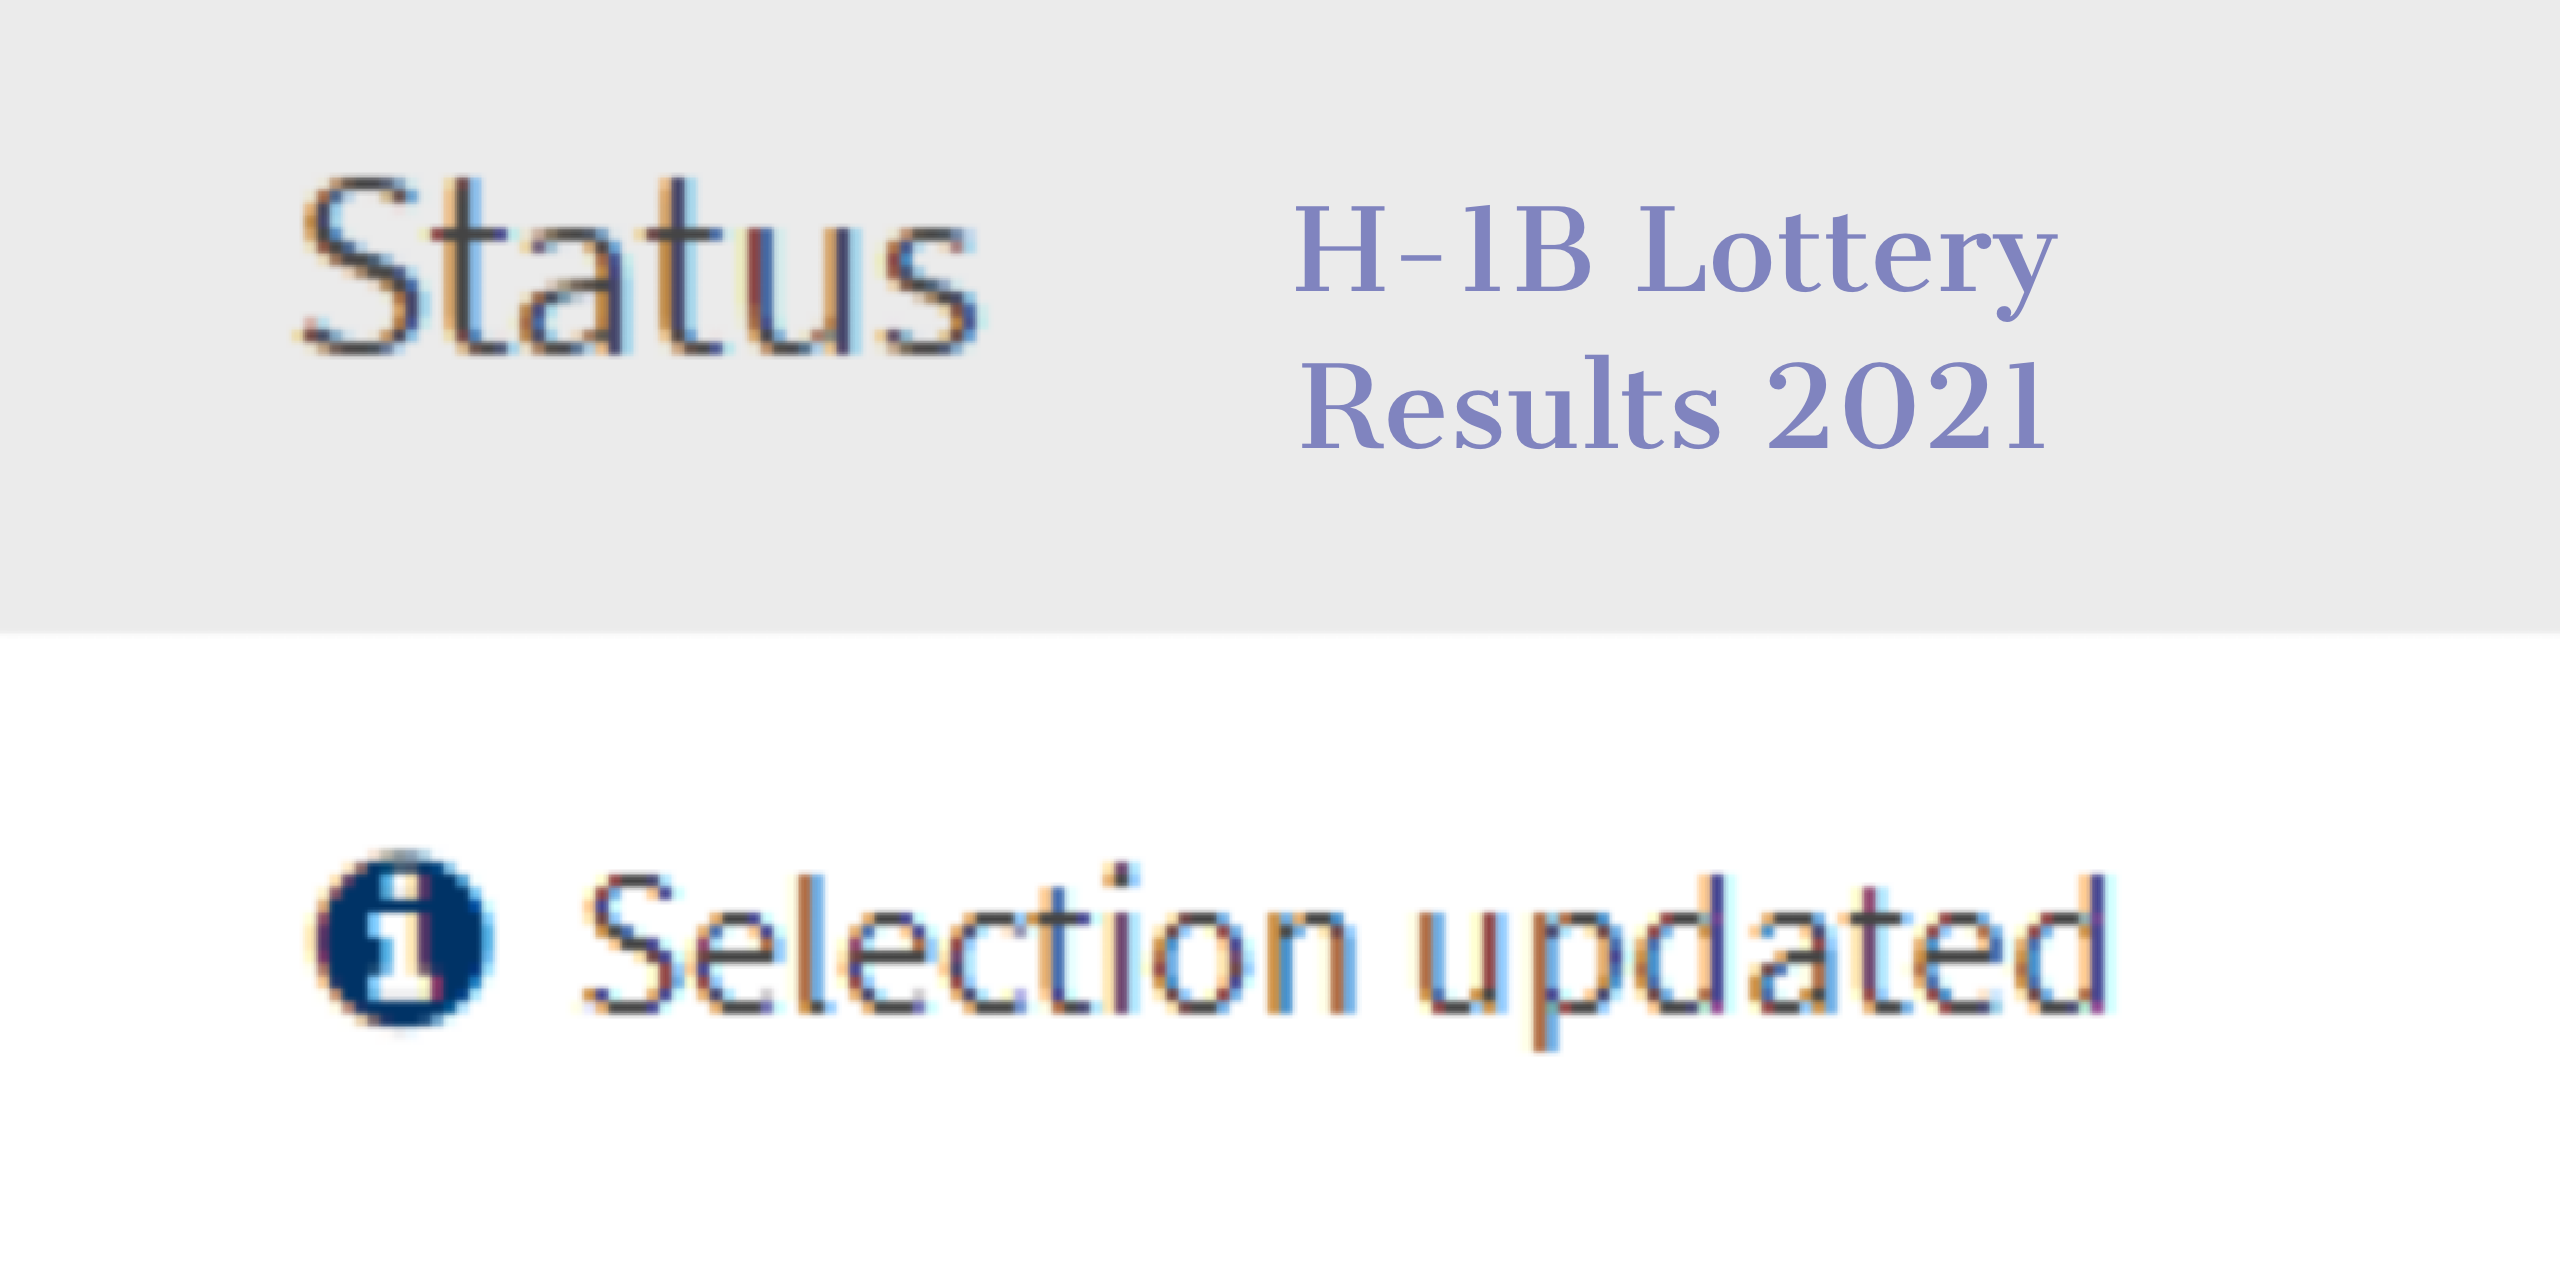 H-1B Lottery Results 2021